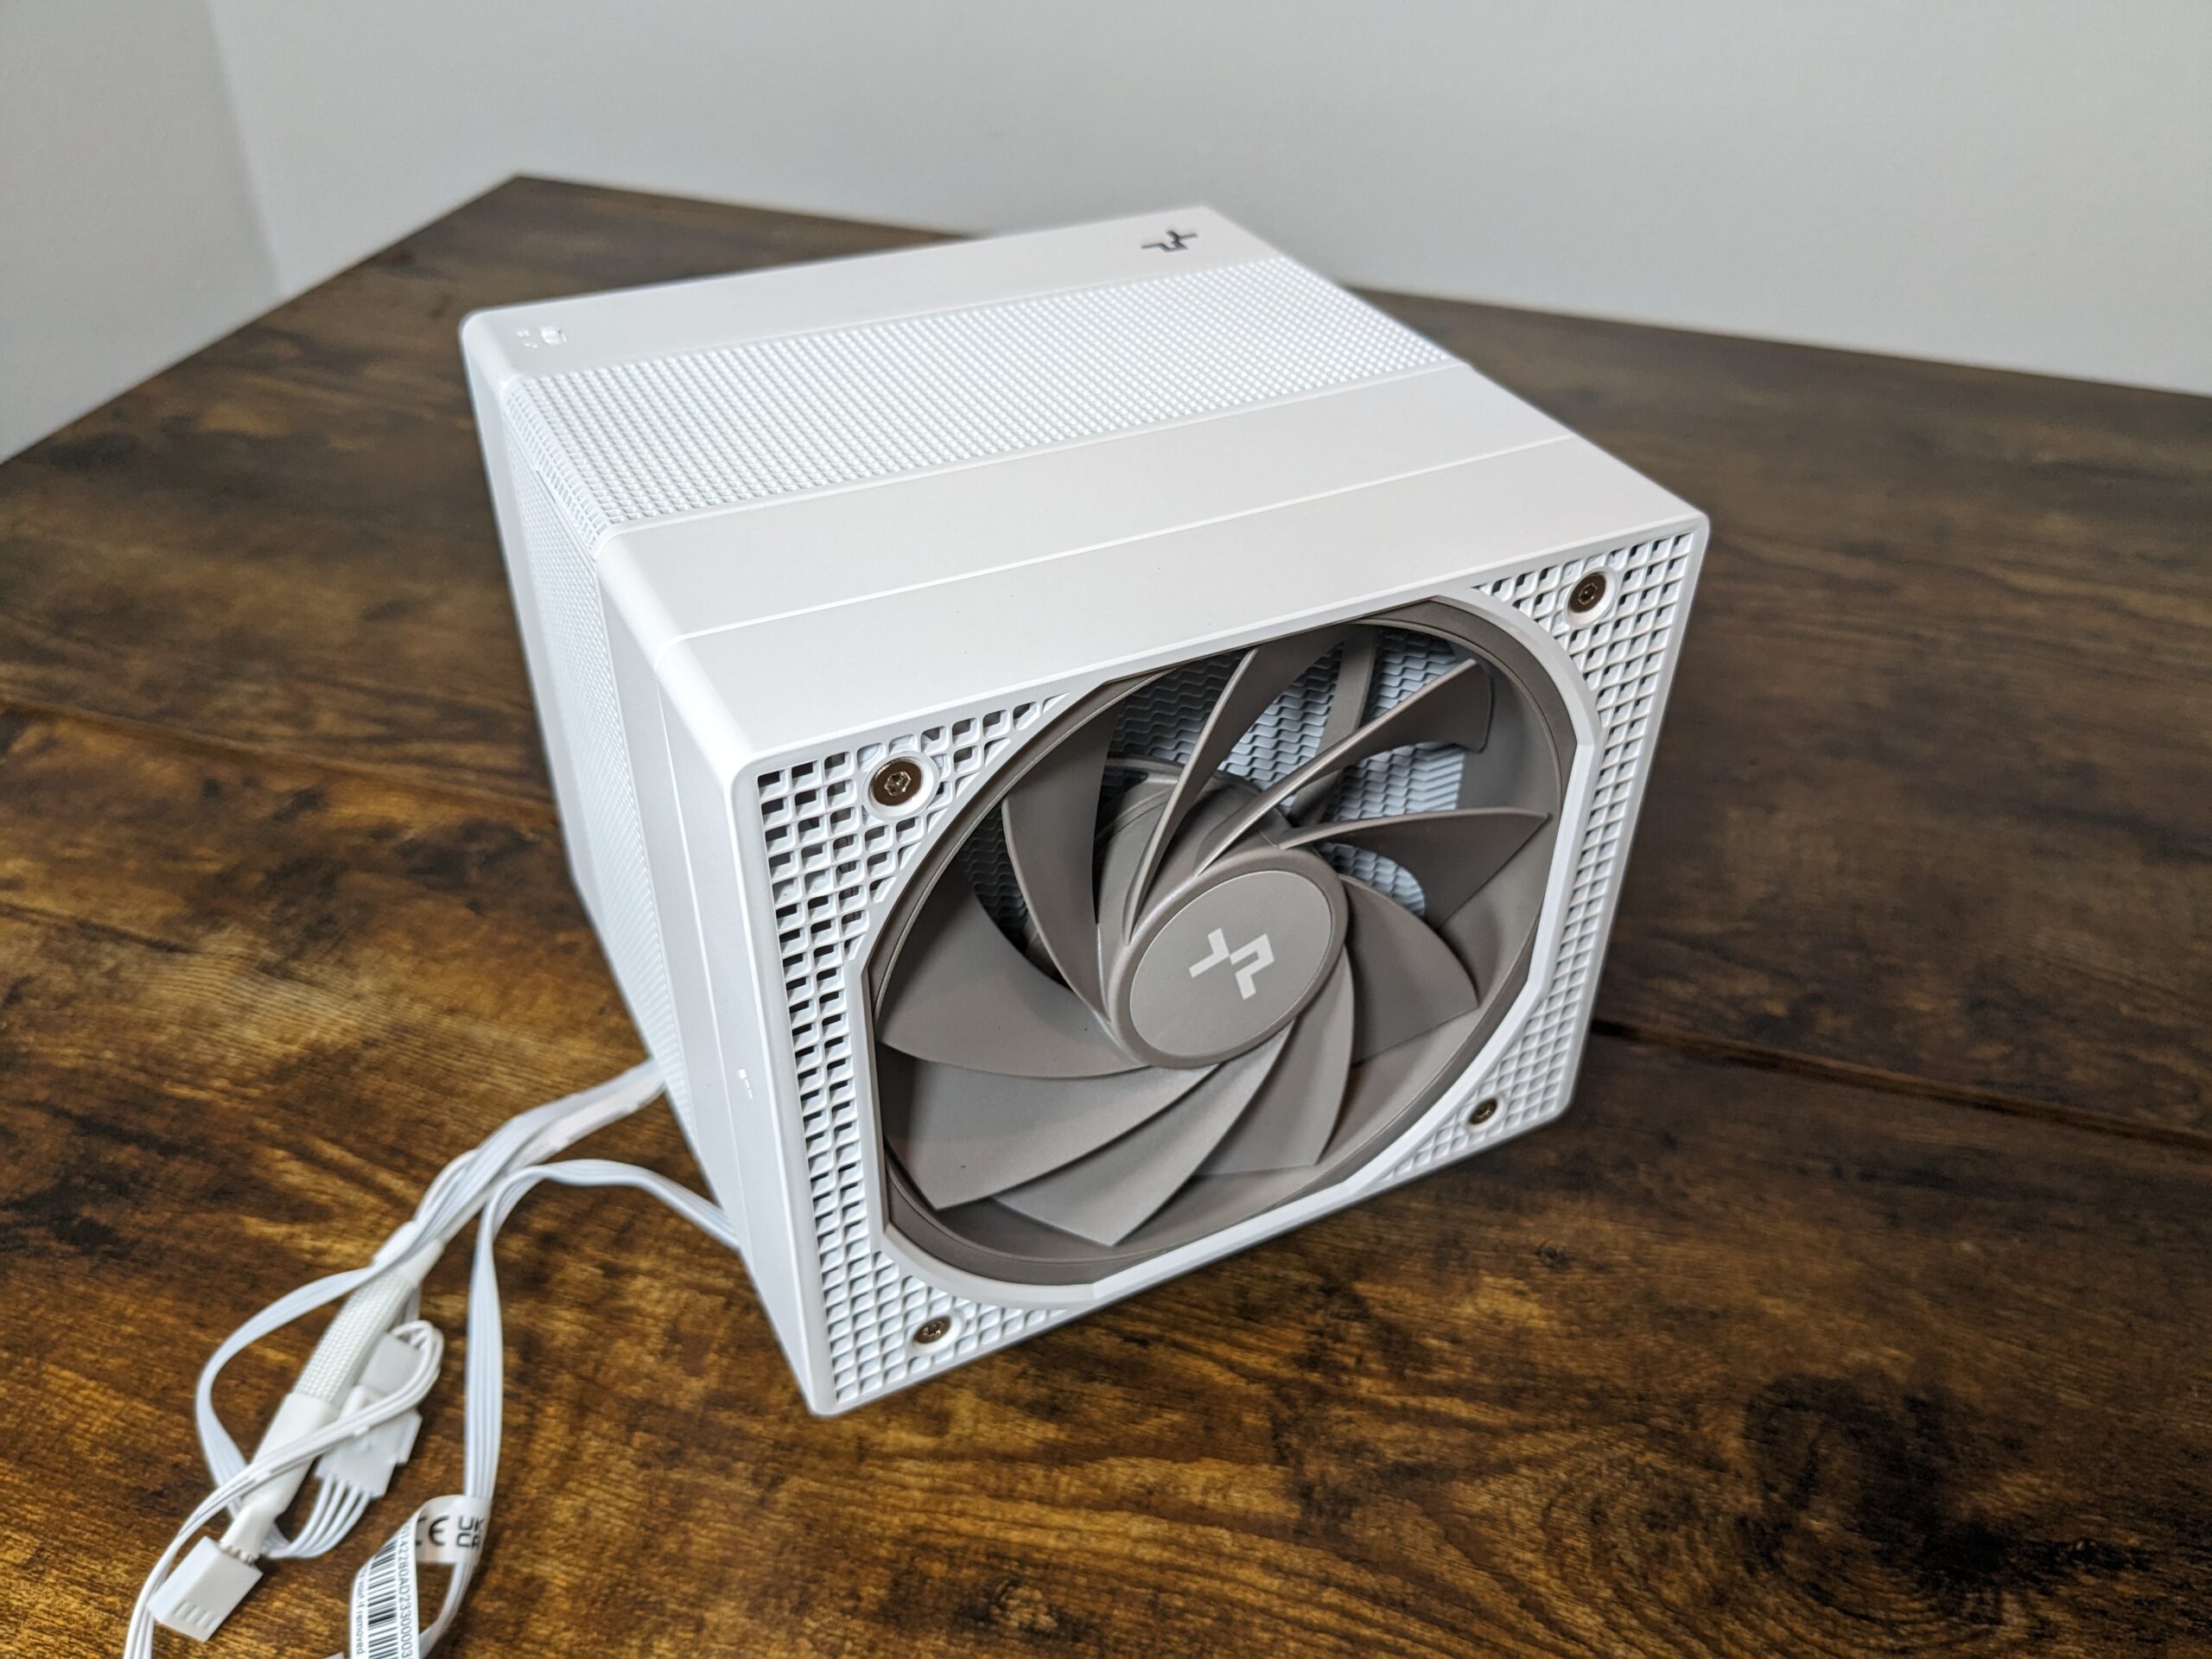 New Reviews: Thermalright HR-10 Pro, DeepCool Assassin IV WH, and